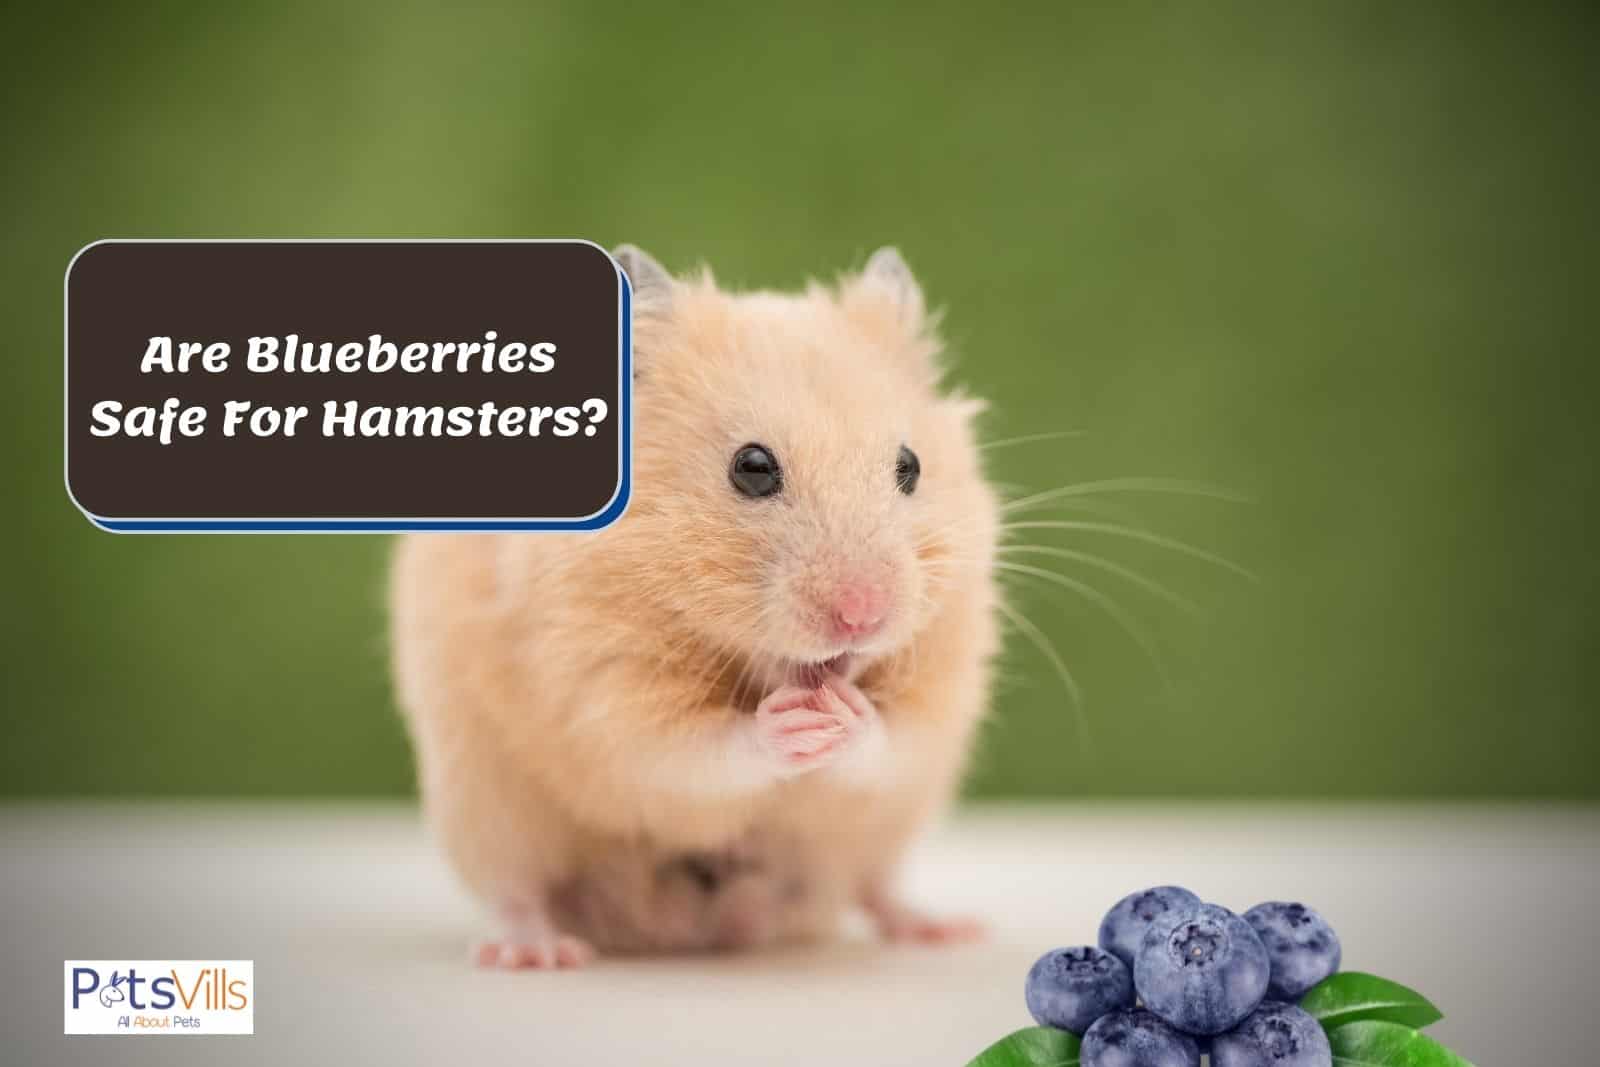 a hamster thinking to eat blueberries, can hamsters eat blueberries